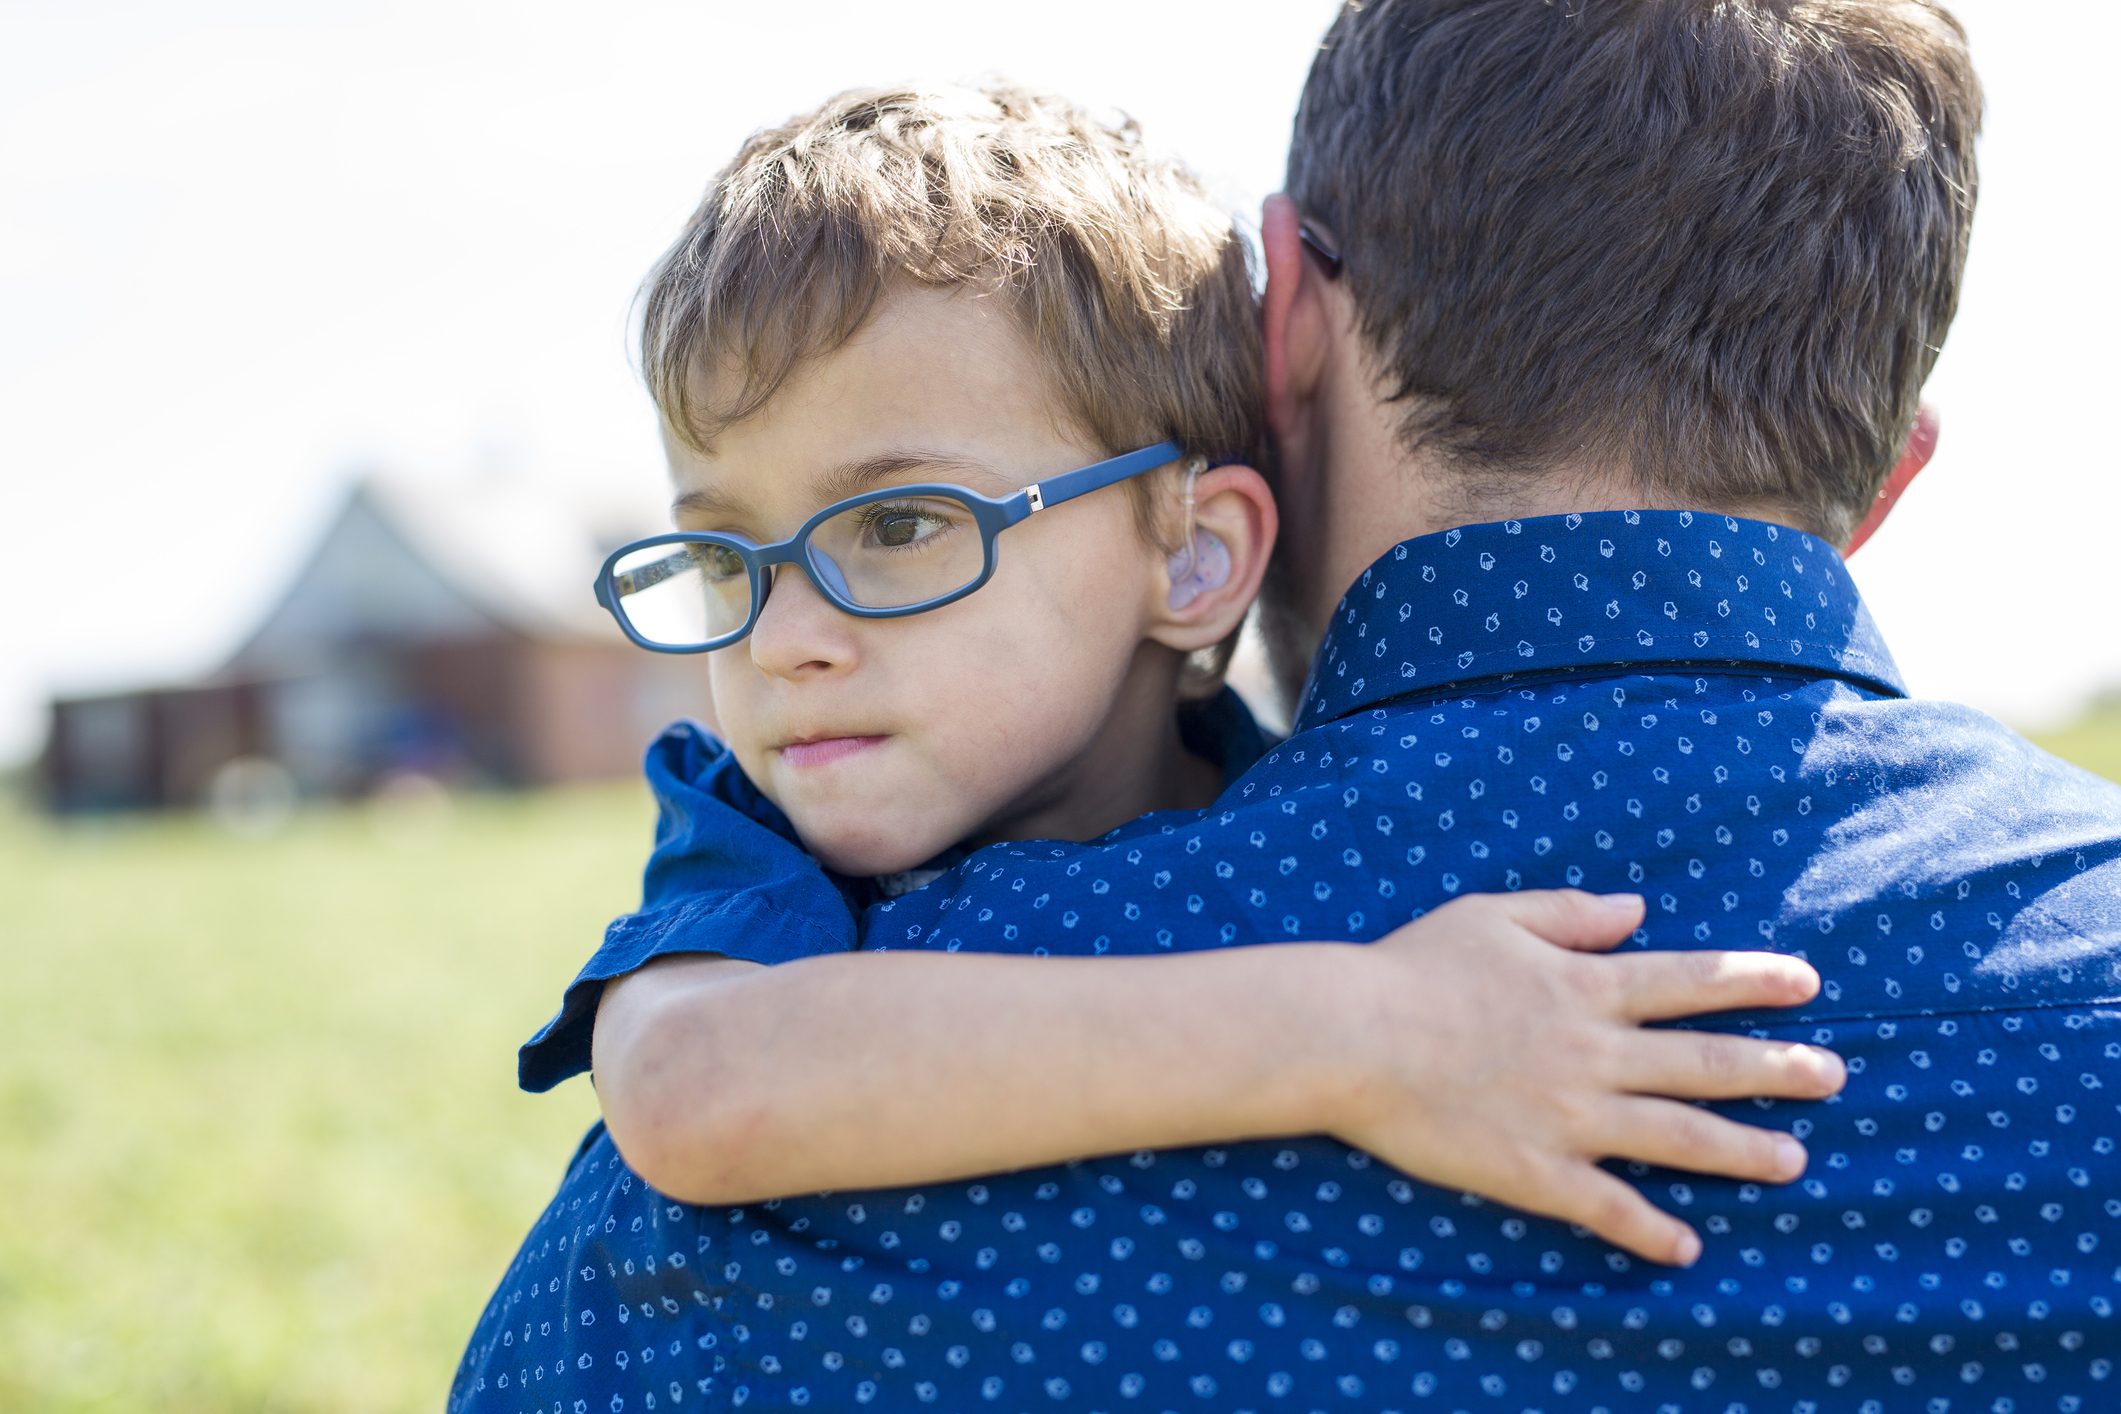 A little boy with pale skin, light brown hair, thick blue glasses, and hearing aids hugs his father, who is carrying him across a field while wearing a bright blue collared shirt